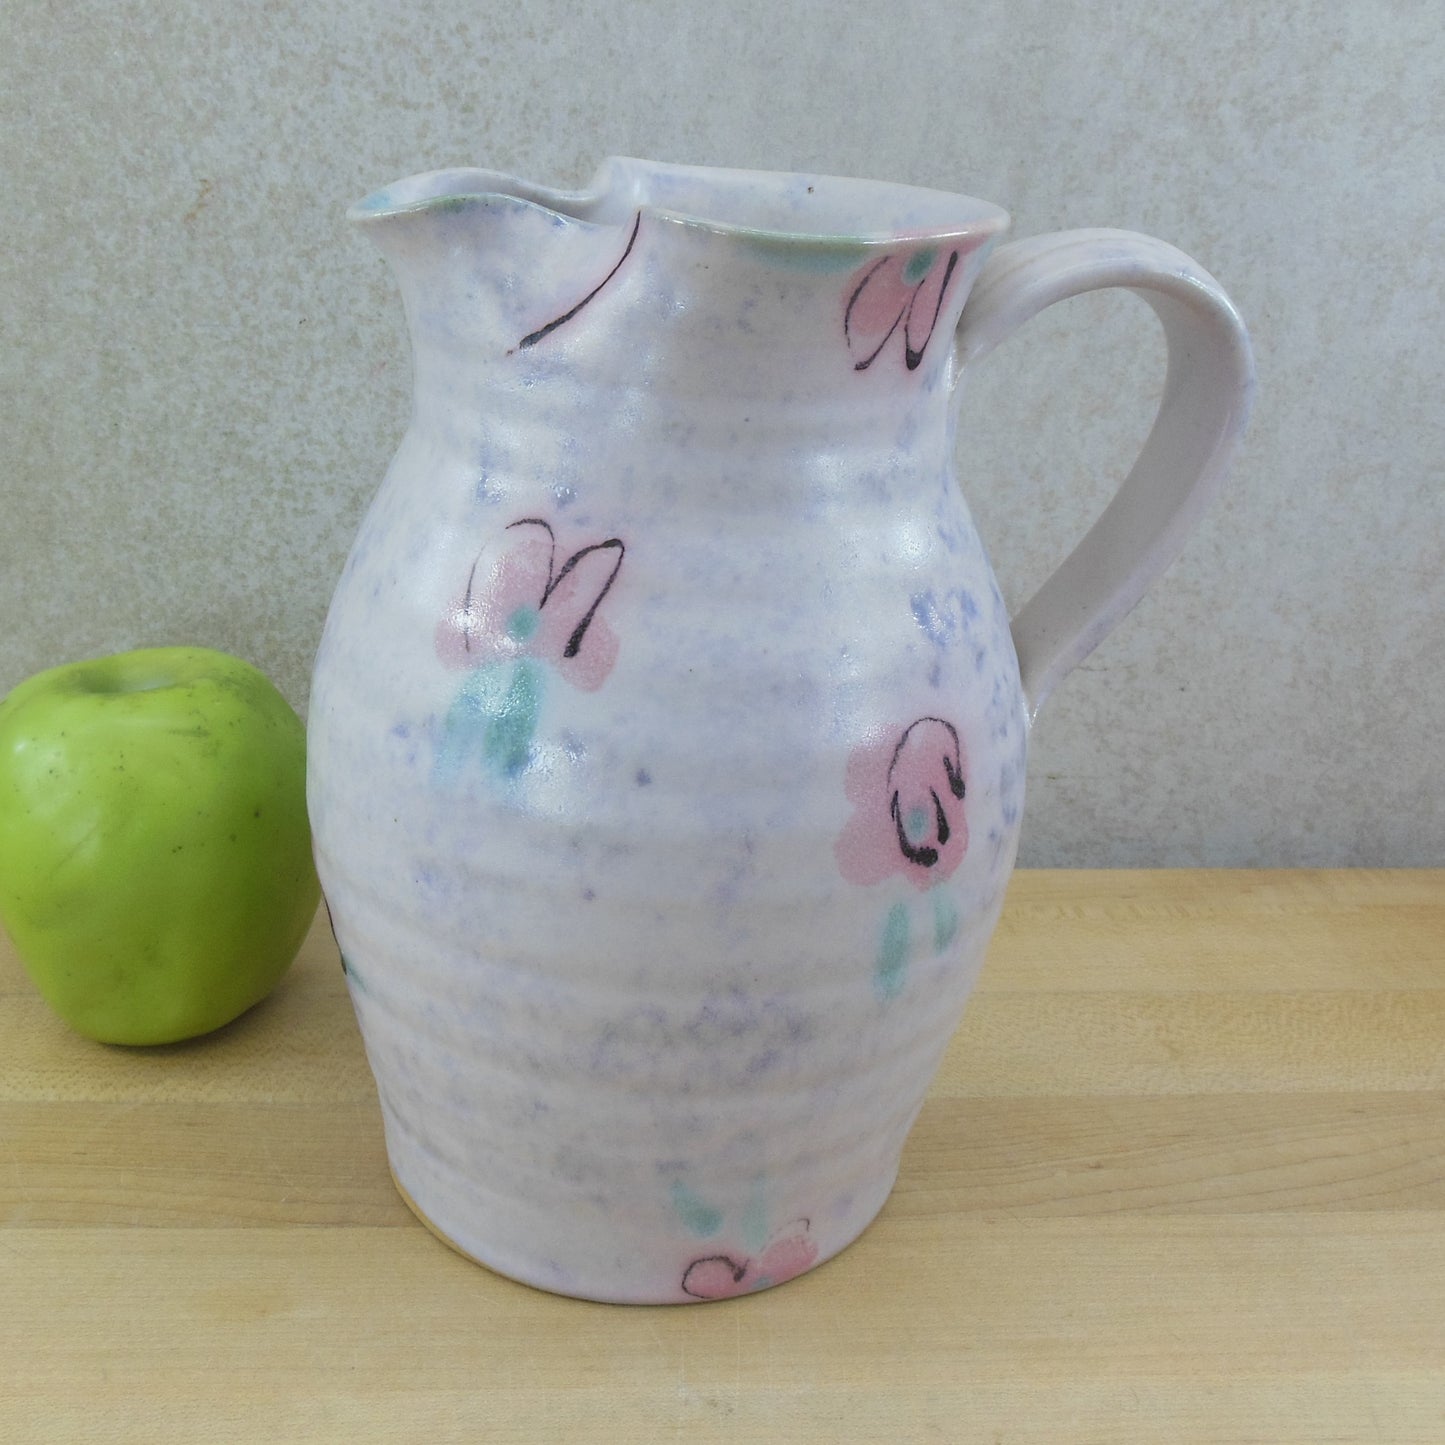 Made In Colorado Unsigned Pottery Pitcher Pink Flowers Purple Sponge used